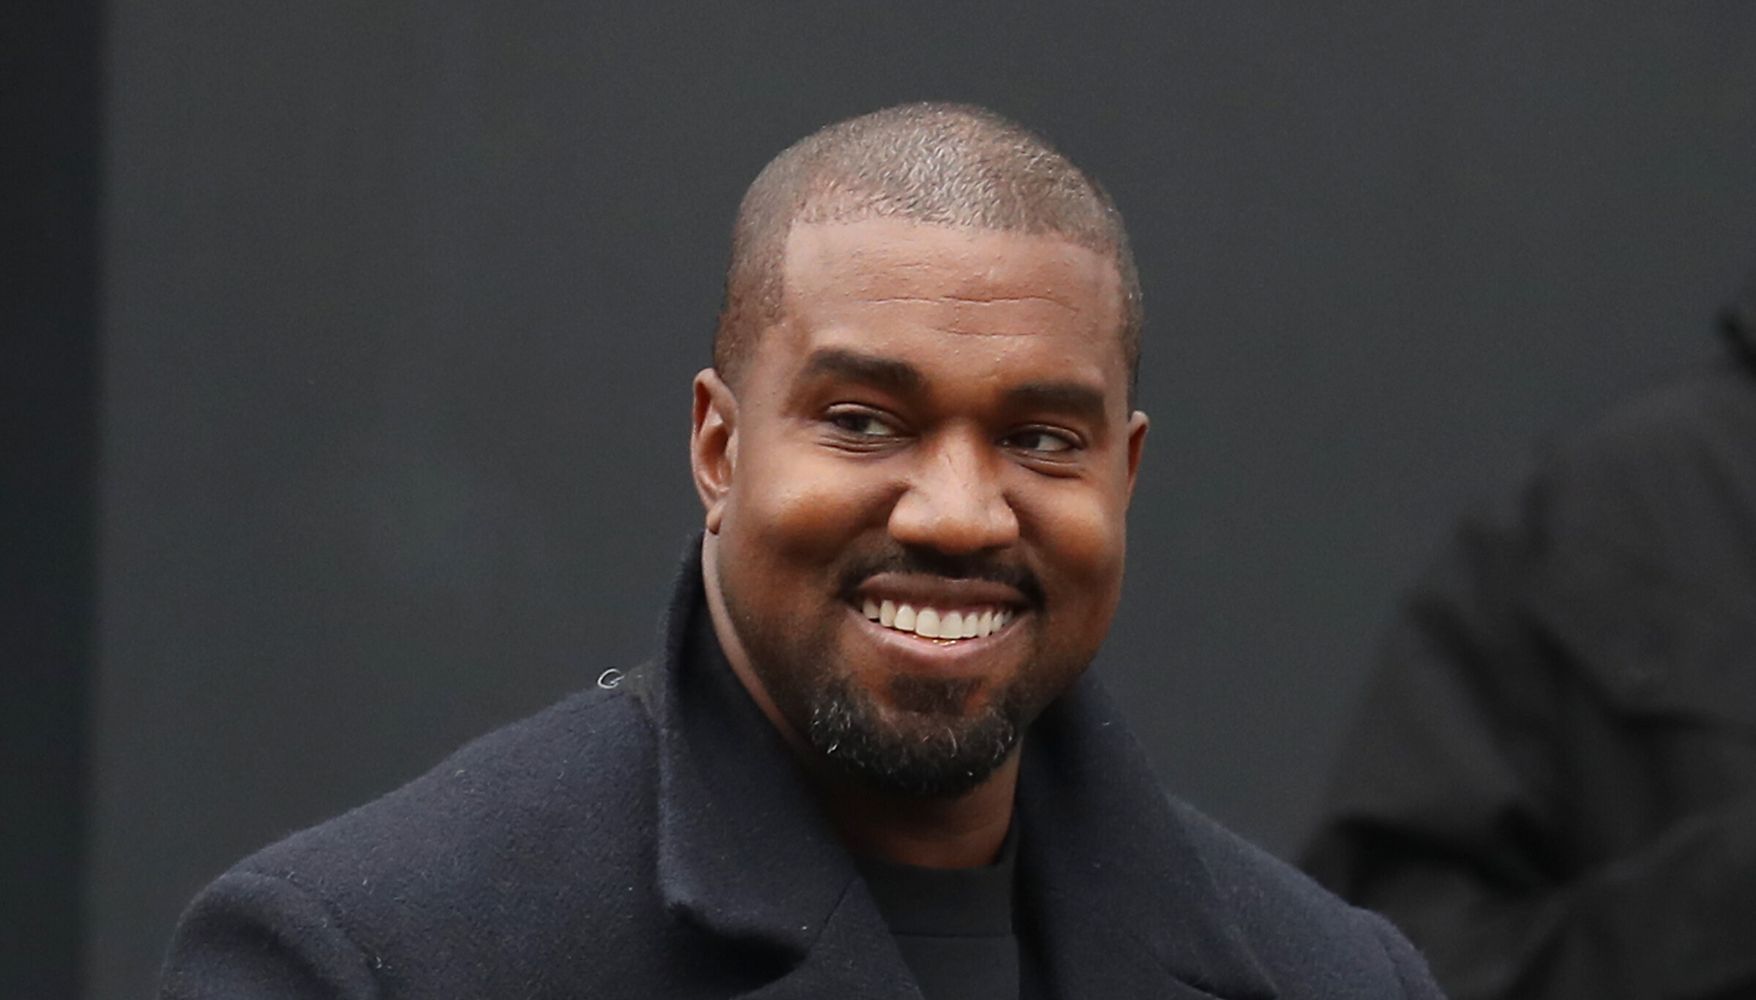 Kanye West Wants To Legally Change His Name To 'Ye'